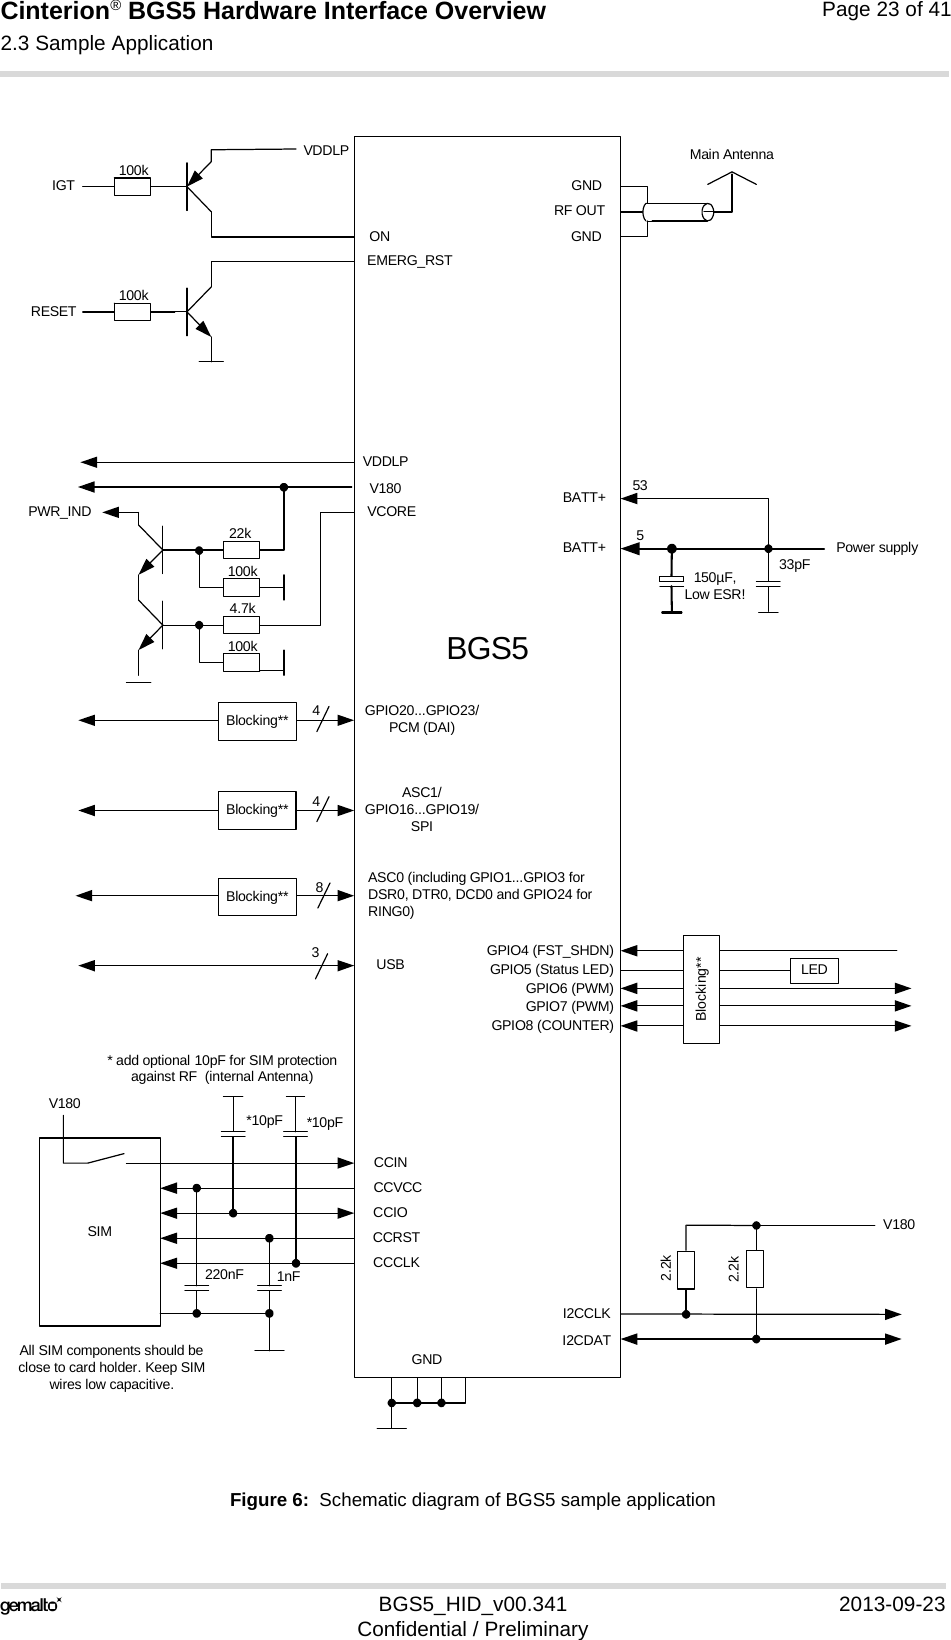 Cinterion® BGS5 Hardware Interface Overview2.3 Sample Application23BGS5_HID_v00.341 2013-09-23Confidential / PreliminaryPage 23 of 41Figure 6:  Schematic diagram of BGS5 sample applicationONEMERG_RSTVCOREV180IGTRESETASC0 (including GPIO1...GPIO3 for DSR0, DTR0, DCD0 and GPIO24 for RING0)ASC1/GPIO16...GPIO19/SPI84CCVCCCCIOCCCLKCCINCCRSTSIMV180220nF 1nFI2CCLKI2CDAT2.2kV180GPIO4 (FST_SHDN) GPIO5 (Status LED)GPIO6 (PWM)GPIO7 (PWM)GPIO8 (COUNTER)LEDGNDGNDGNDRF OUTBATT+Power supplyMain AntennaBGS5All SIM components should be close to card holder. Keep SIM wires low capacitive.*10pF *10pF* add optional 10pF for SIM protection against RF  (internal Antenna)150µF,Low ESR!33pFBlocking**Blocking**Blocking**VDDLPPWR_INDBATT+535GPIO20...GPIO23/PCM (DAI)4Blocking**VDDLP100k100k100k4.7k100k22k2.2k3USB